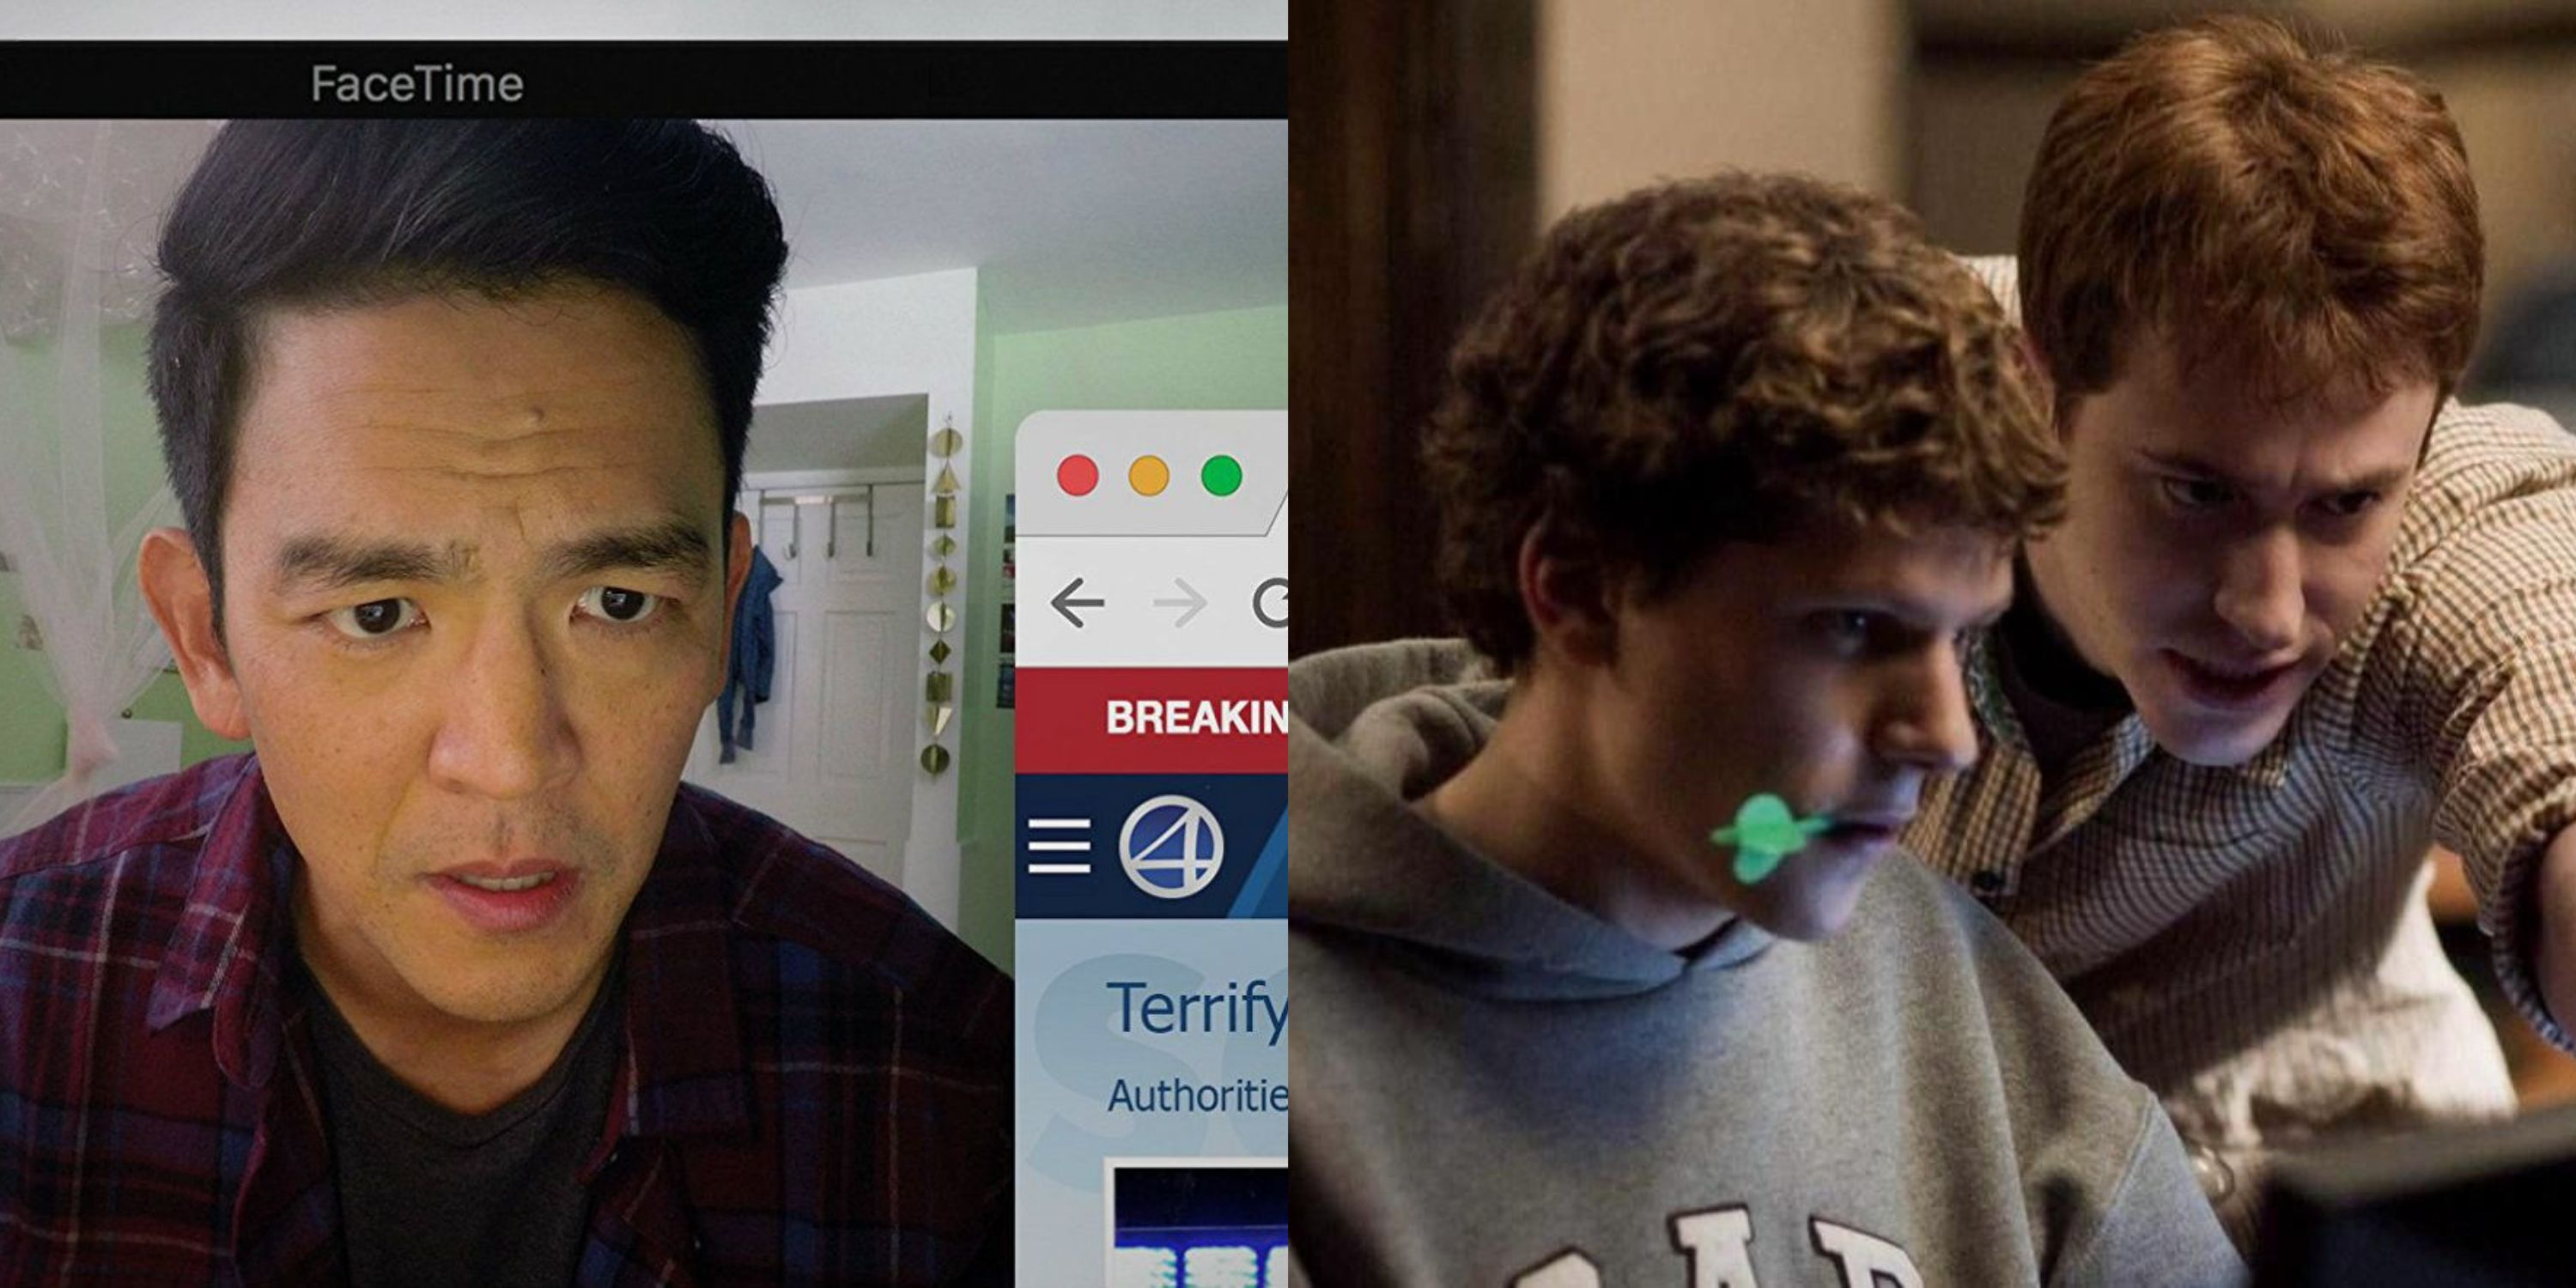 Featured image split John Cho in Searching 2018 and Jesse Eisenberg in The Social Network